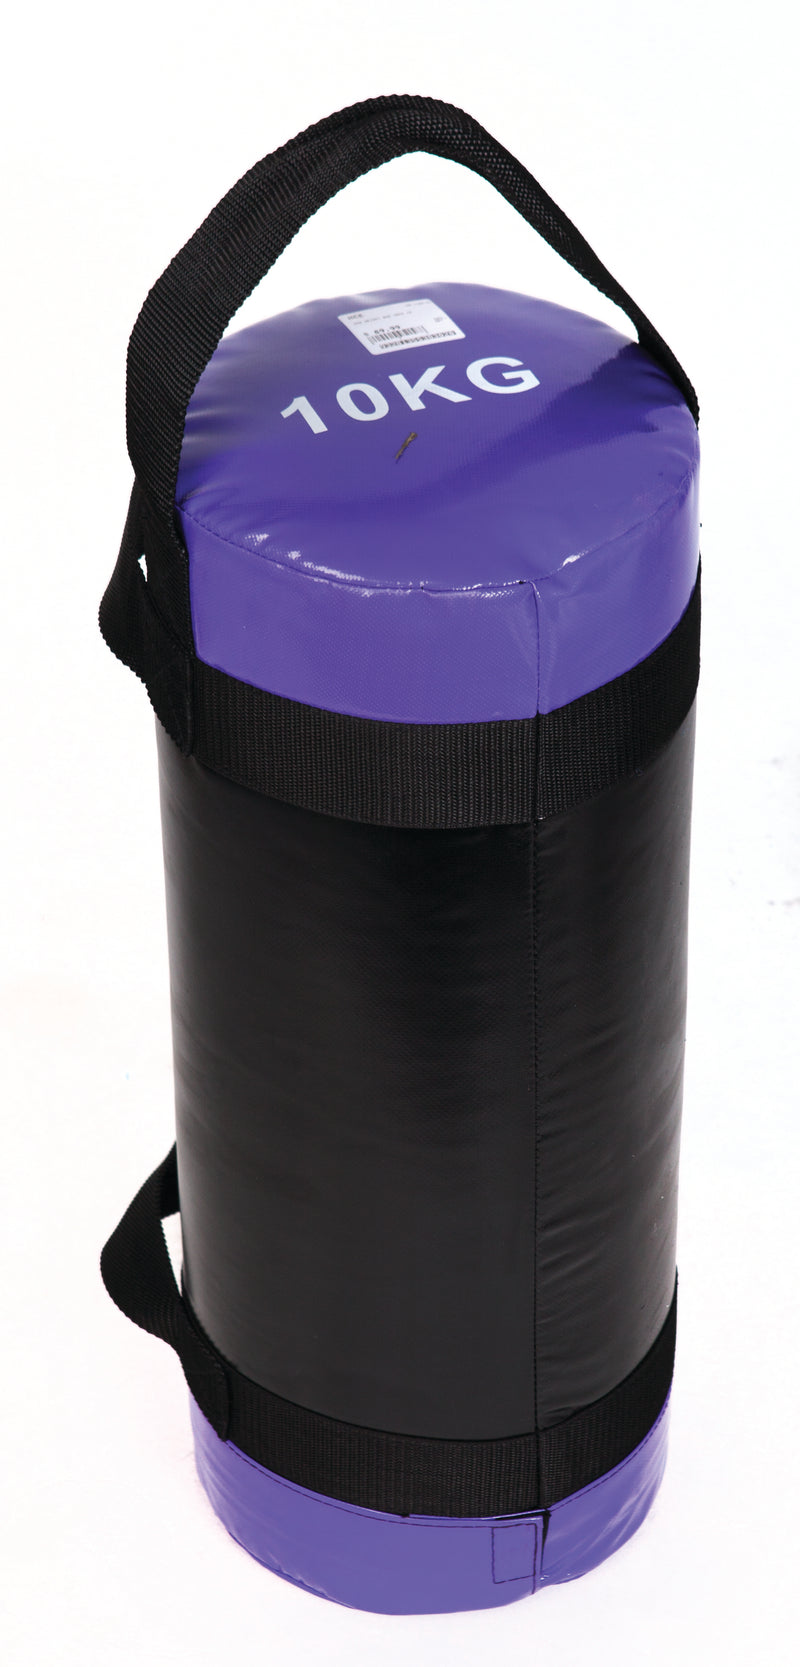 HCE 10Kg Weight Bag